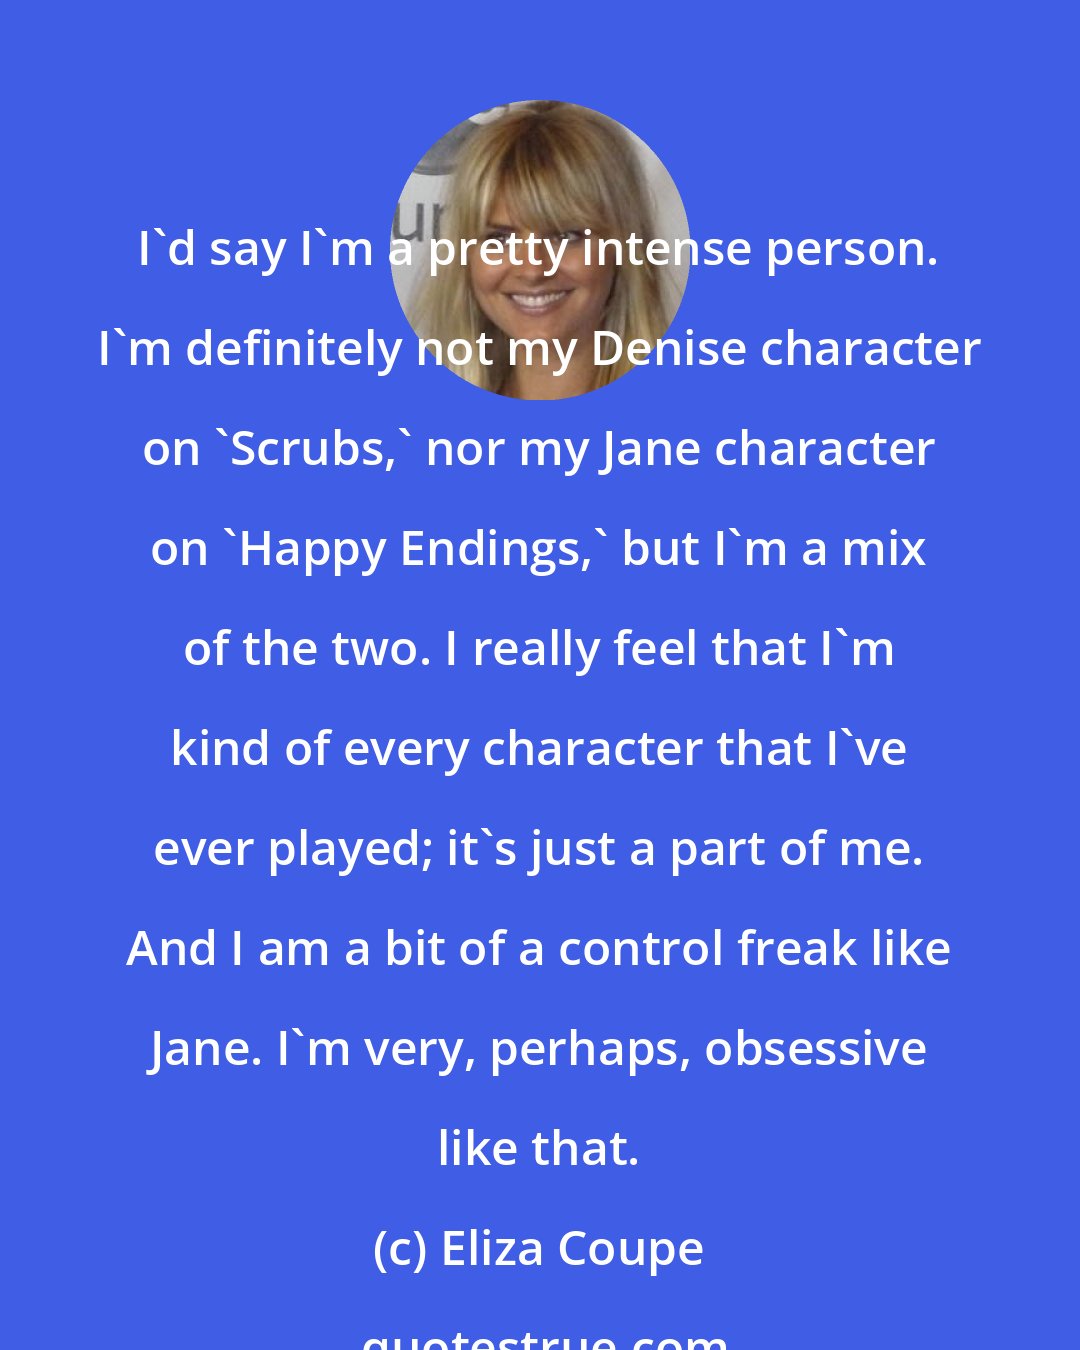 Eliza Coupe: I'd say I'm a pretty intense person. I'm definitely not my Denise character on 'Scrubs,' nor my Jane character on 'Happy Endings,' but I'm a mix of the two. I really feel that I'm kind of every character that I've ever played; it's just a part of me. And I am a bit of a control freak like Jane. I'm very, perhaps, obsessive like that.